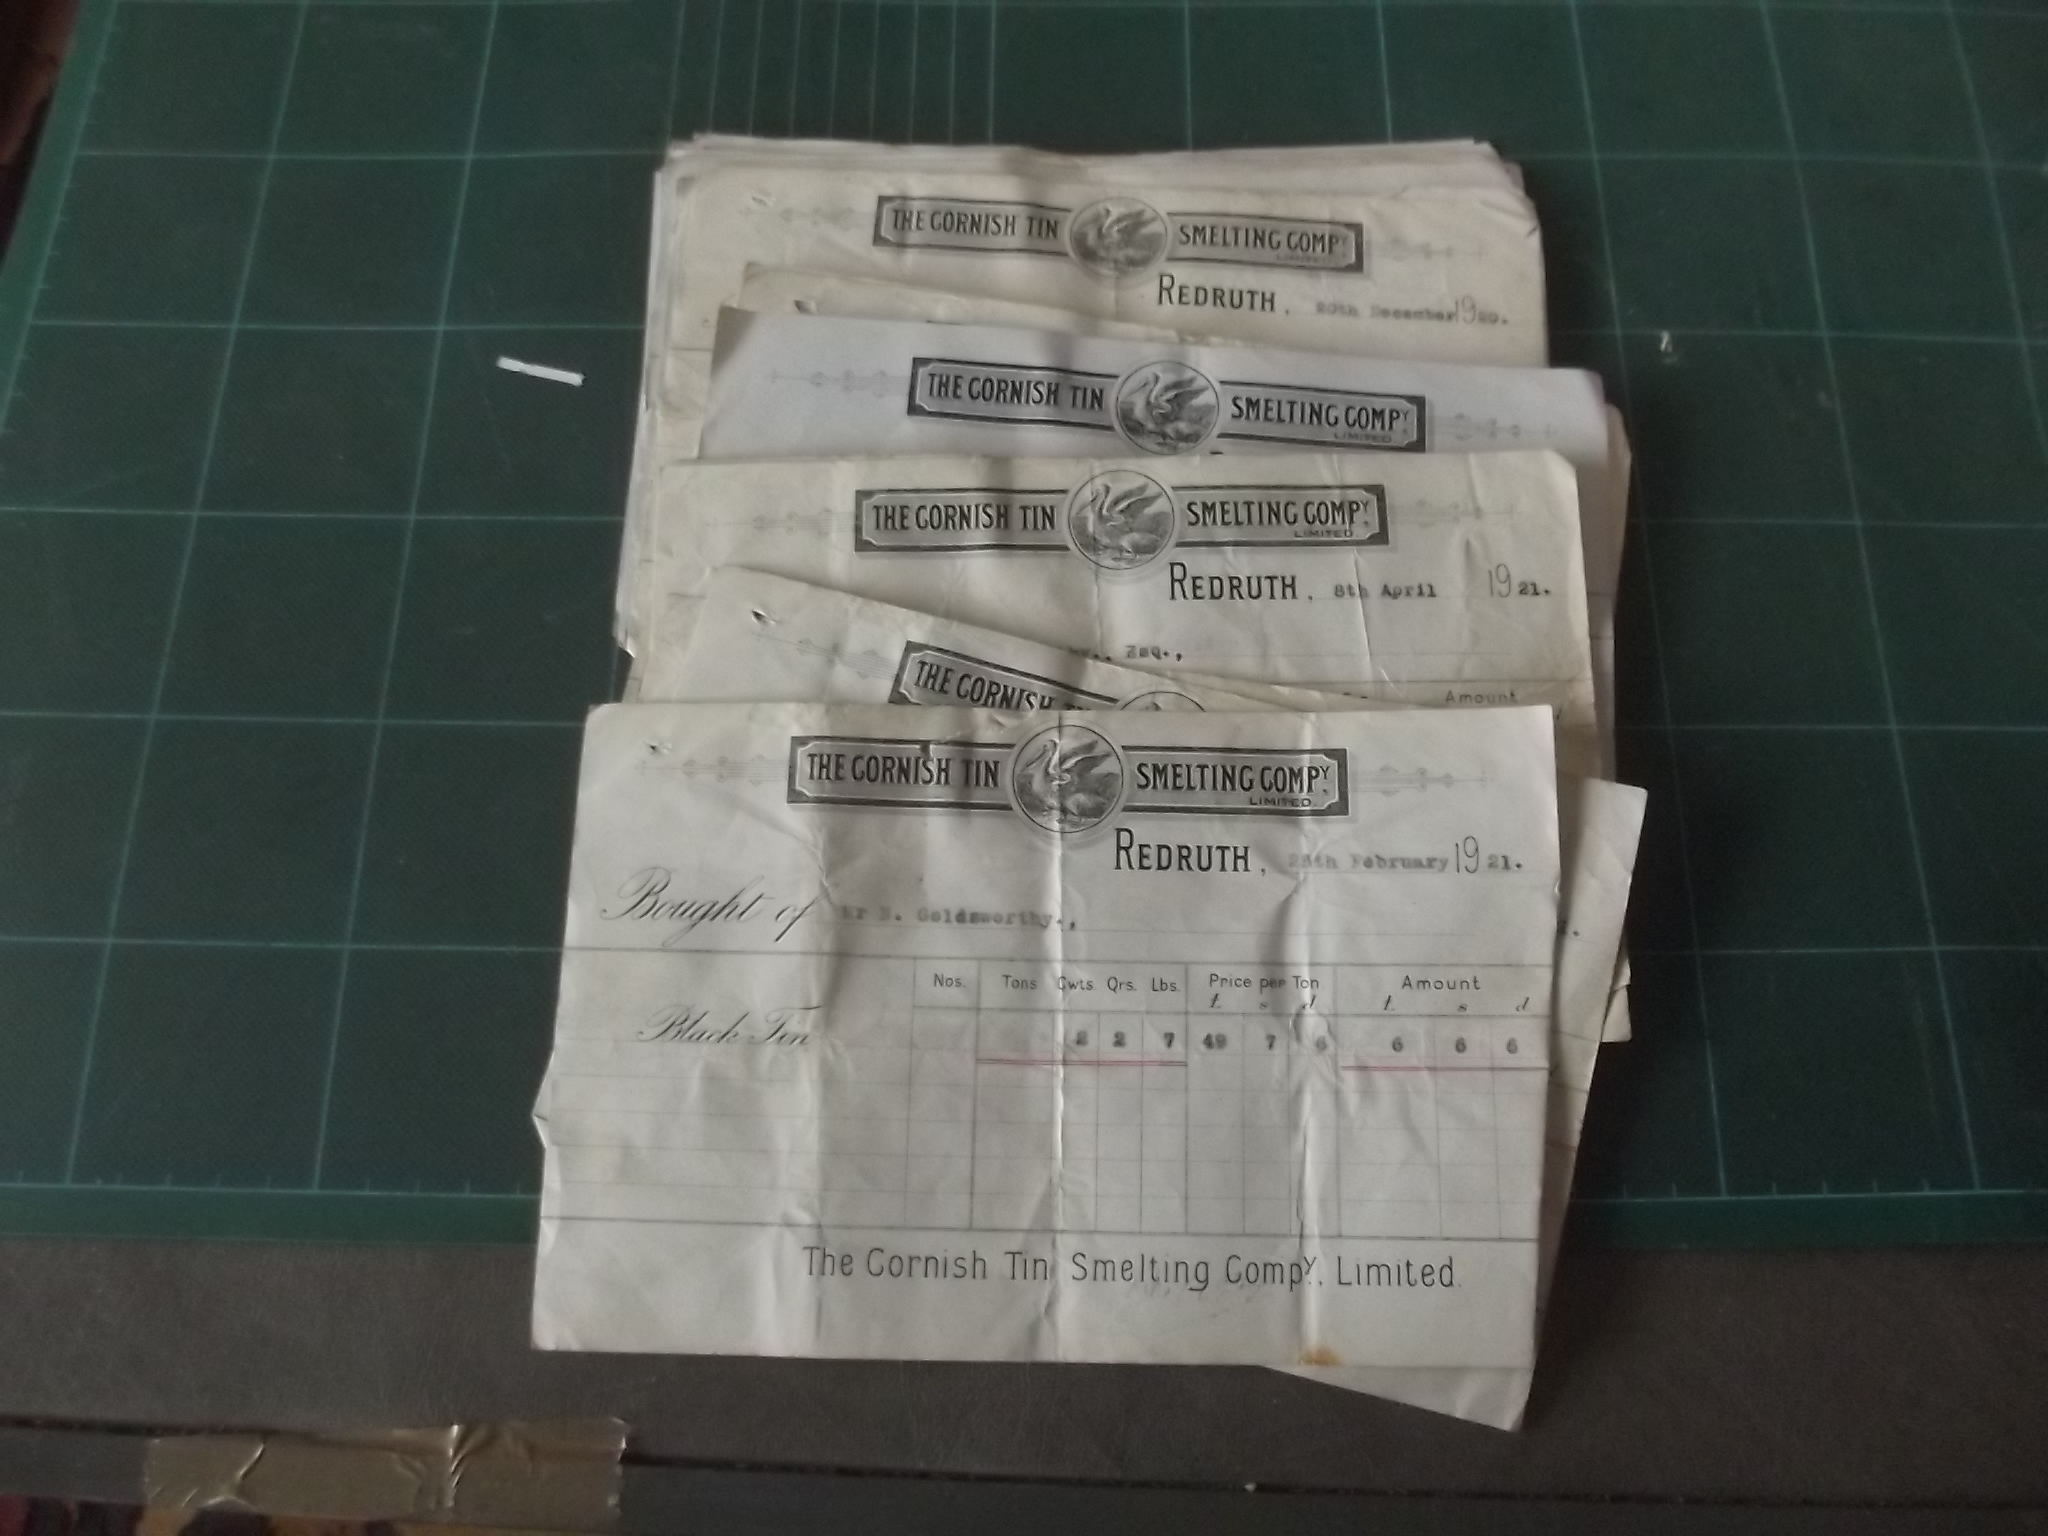 THE CORNISH TIN SMELTING COMPANY. 32 receipts re Black Tin sold by Mr N. Goldsworthy 1921-3.